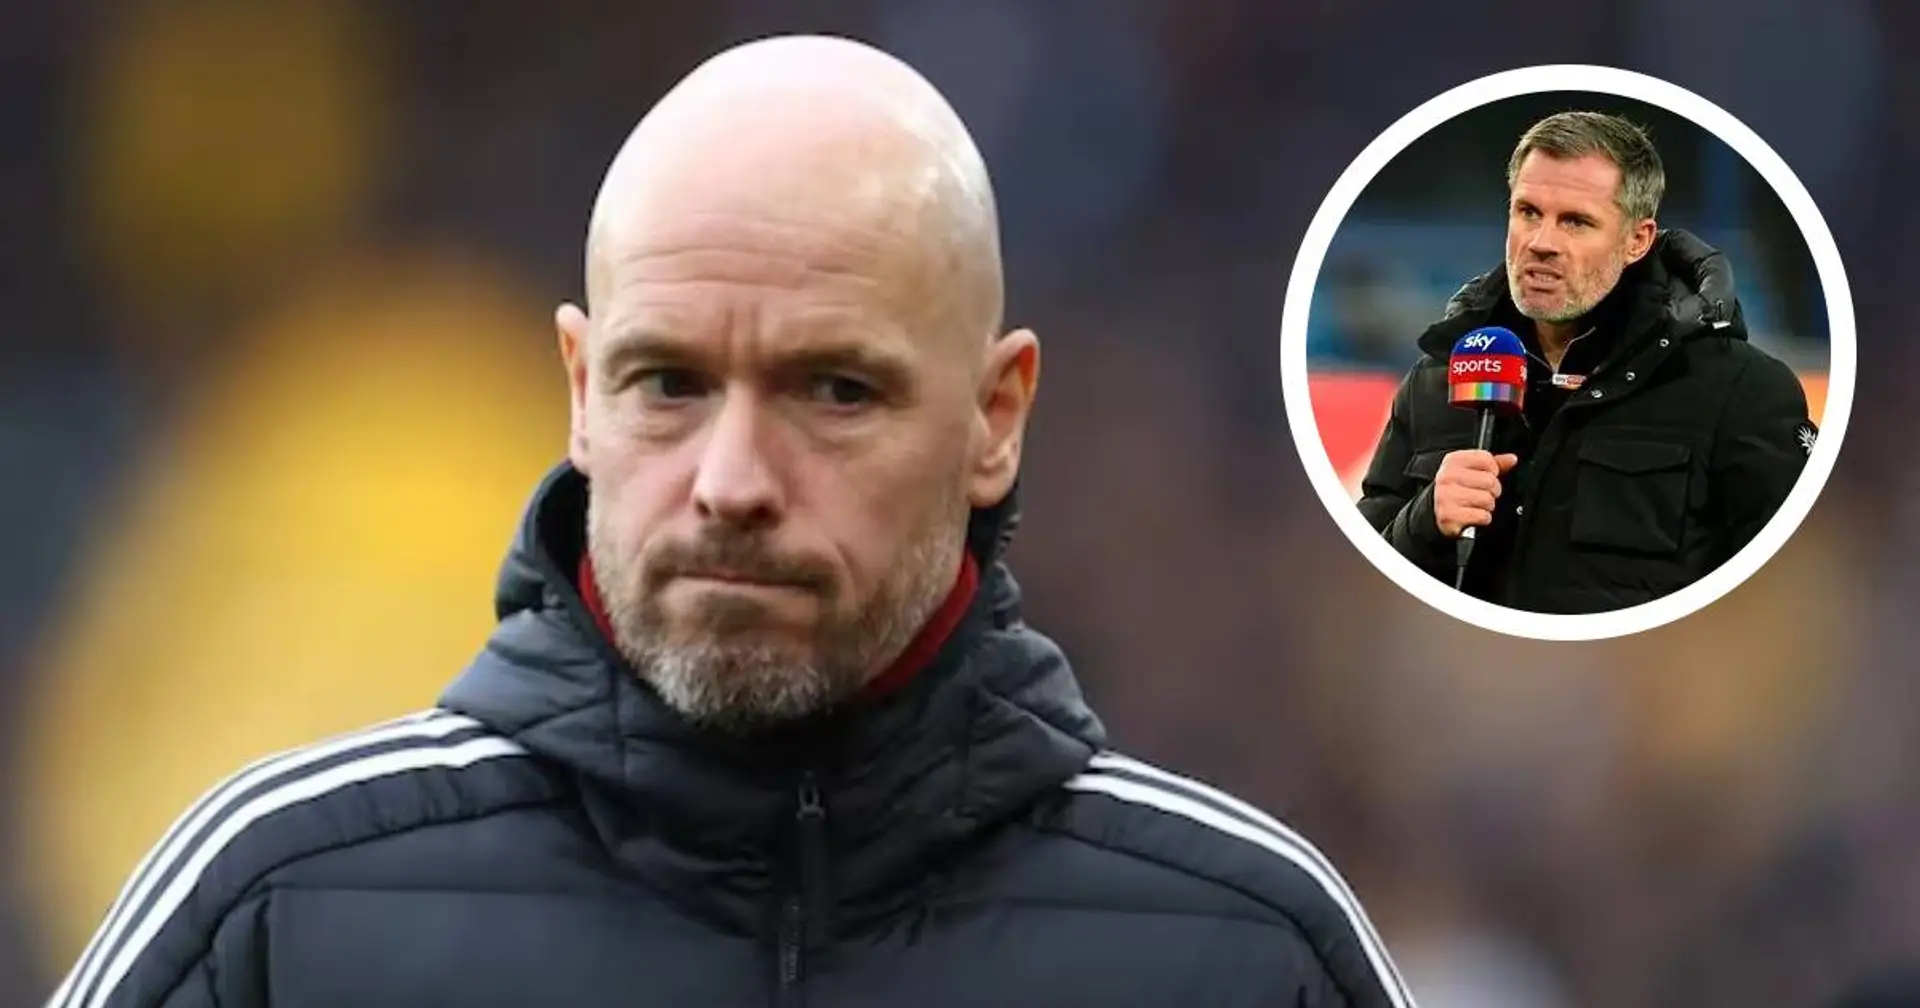 Jamie Carragher names 3 reasons why losing to Liverpool could get Erik ten Hag sacked